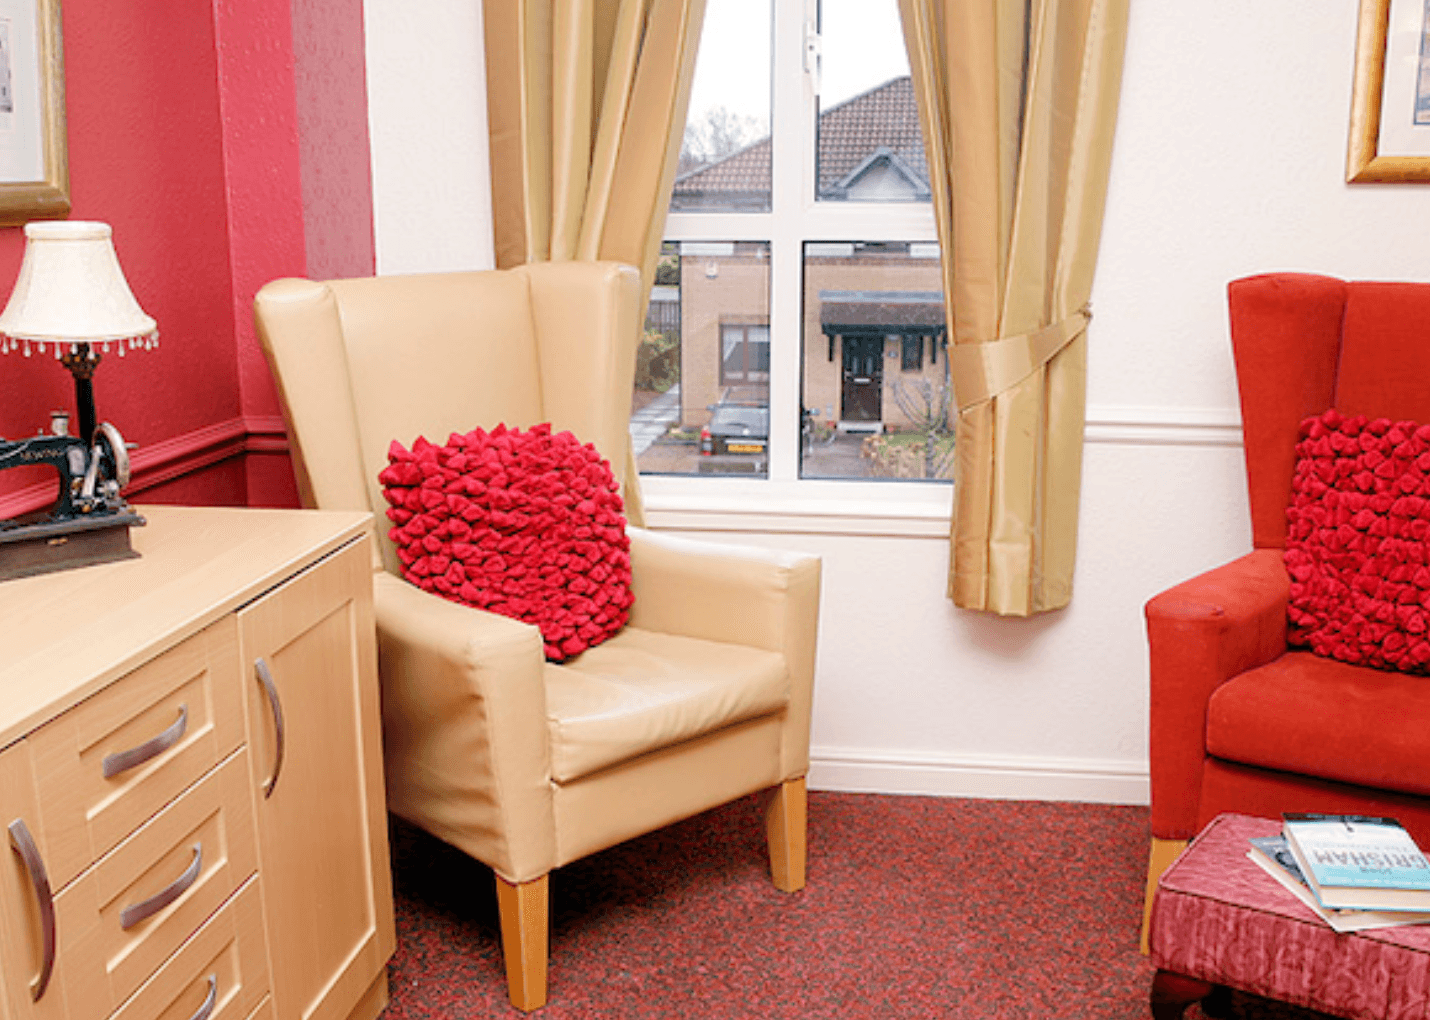 Lounge of Norwood care home in Barrhead, Scotland